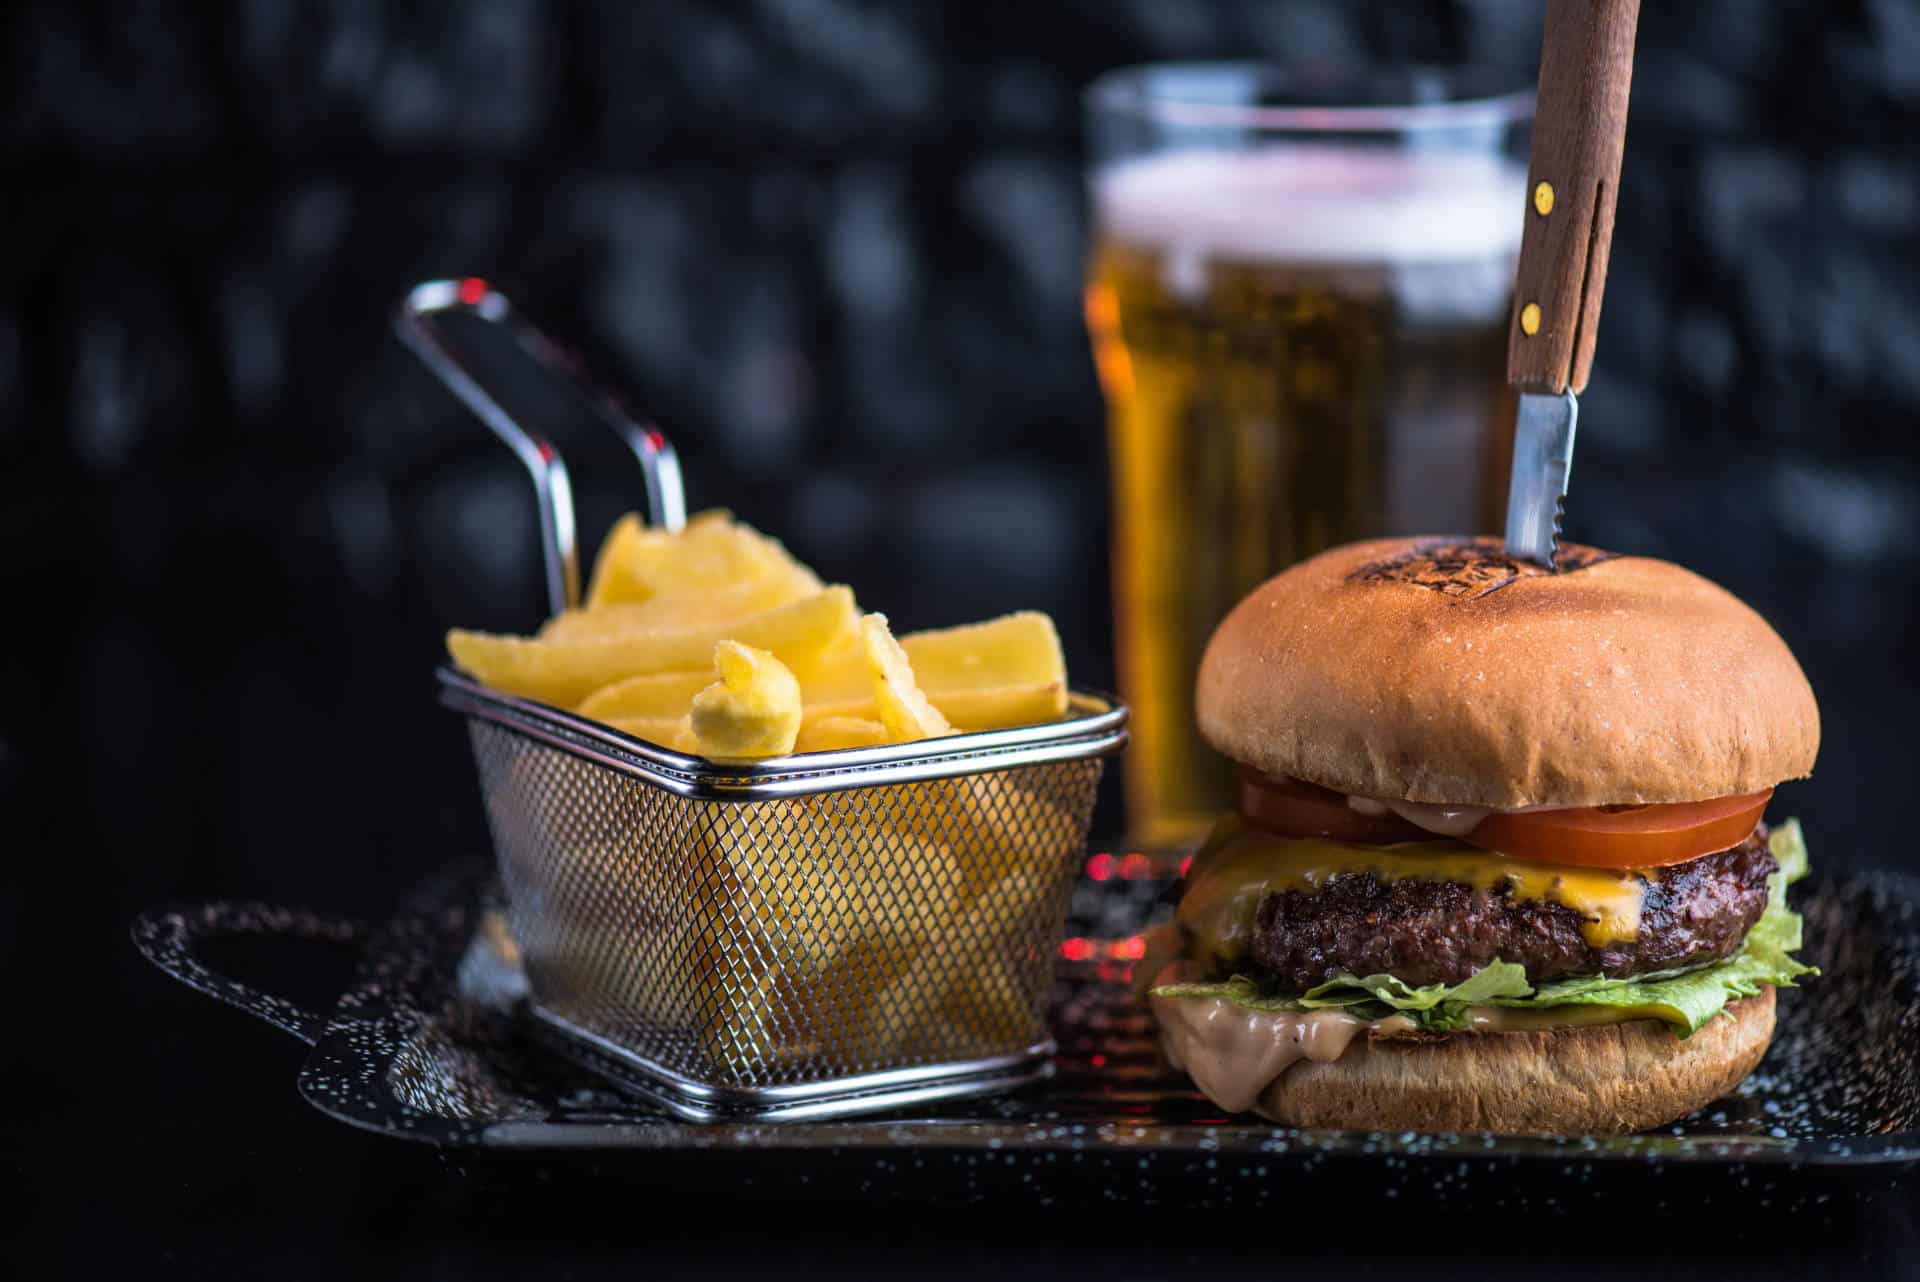 Burger, chips and pint of beer.